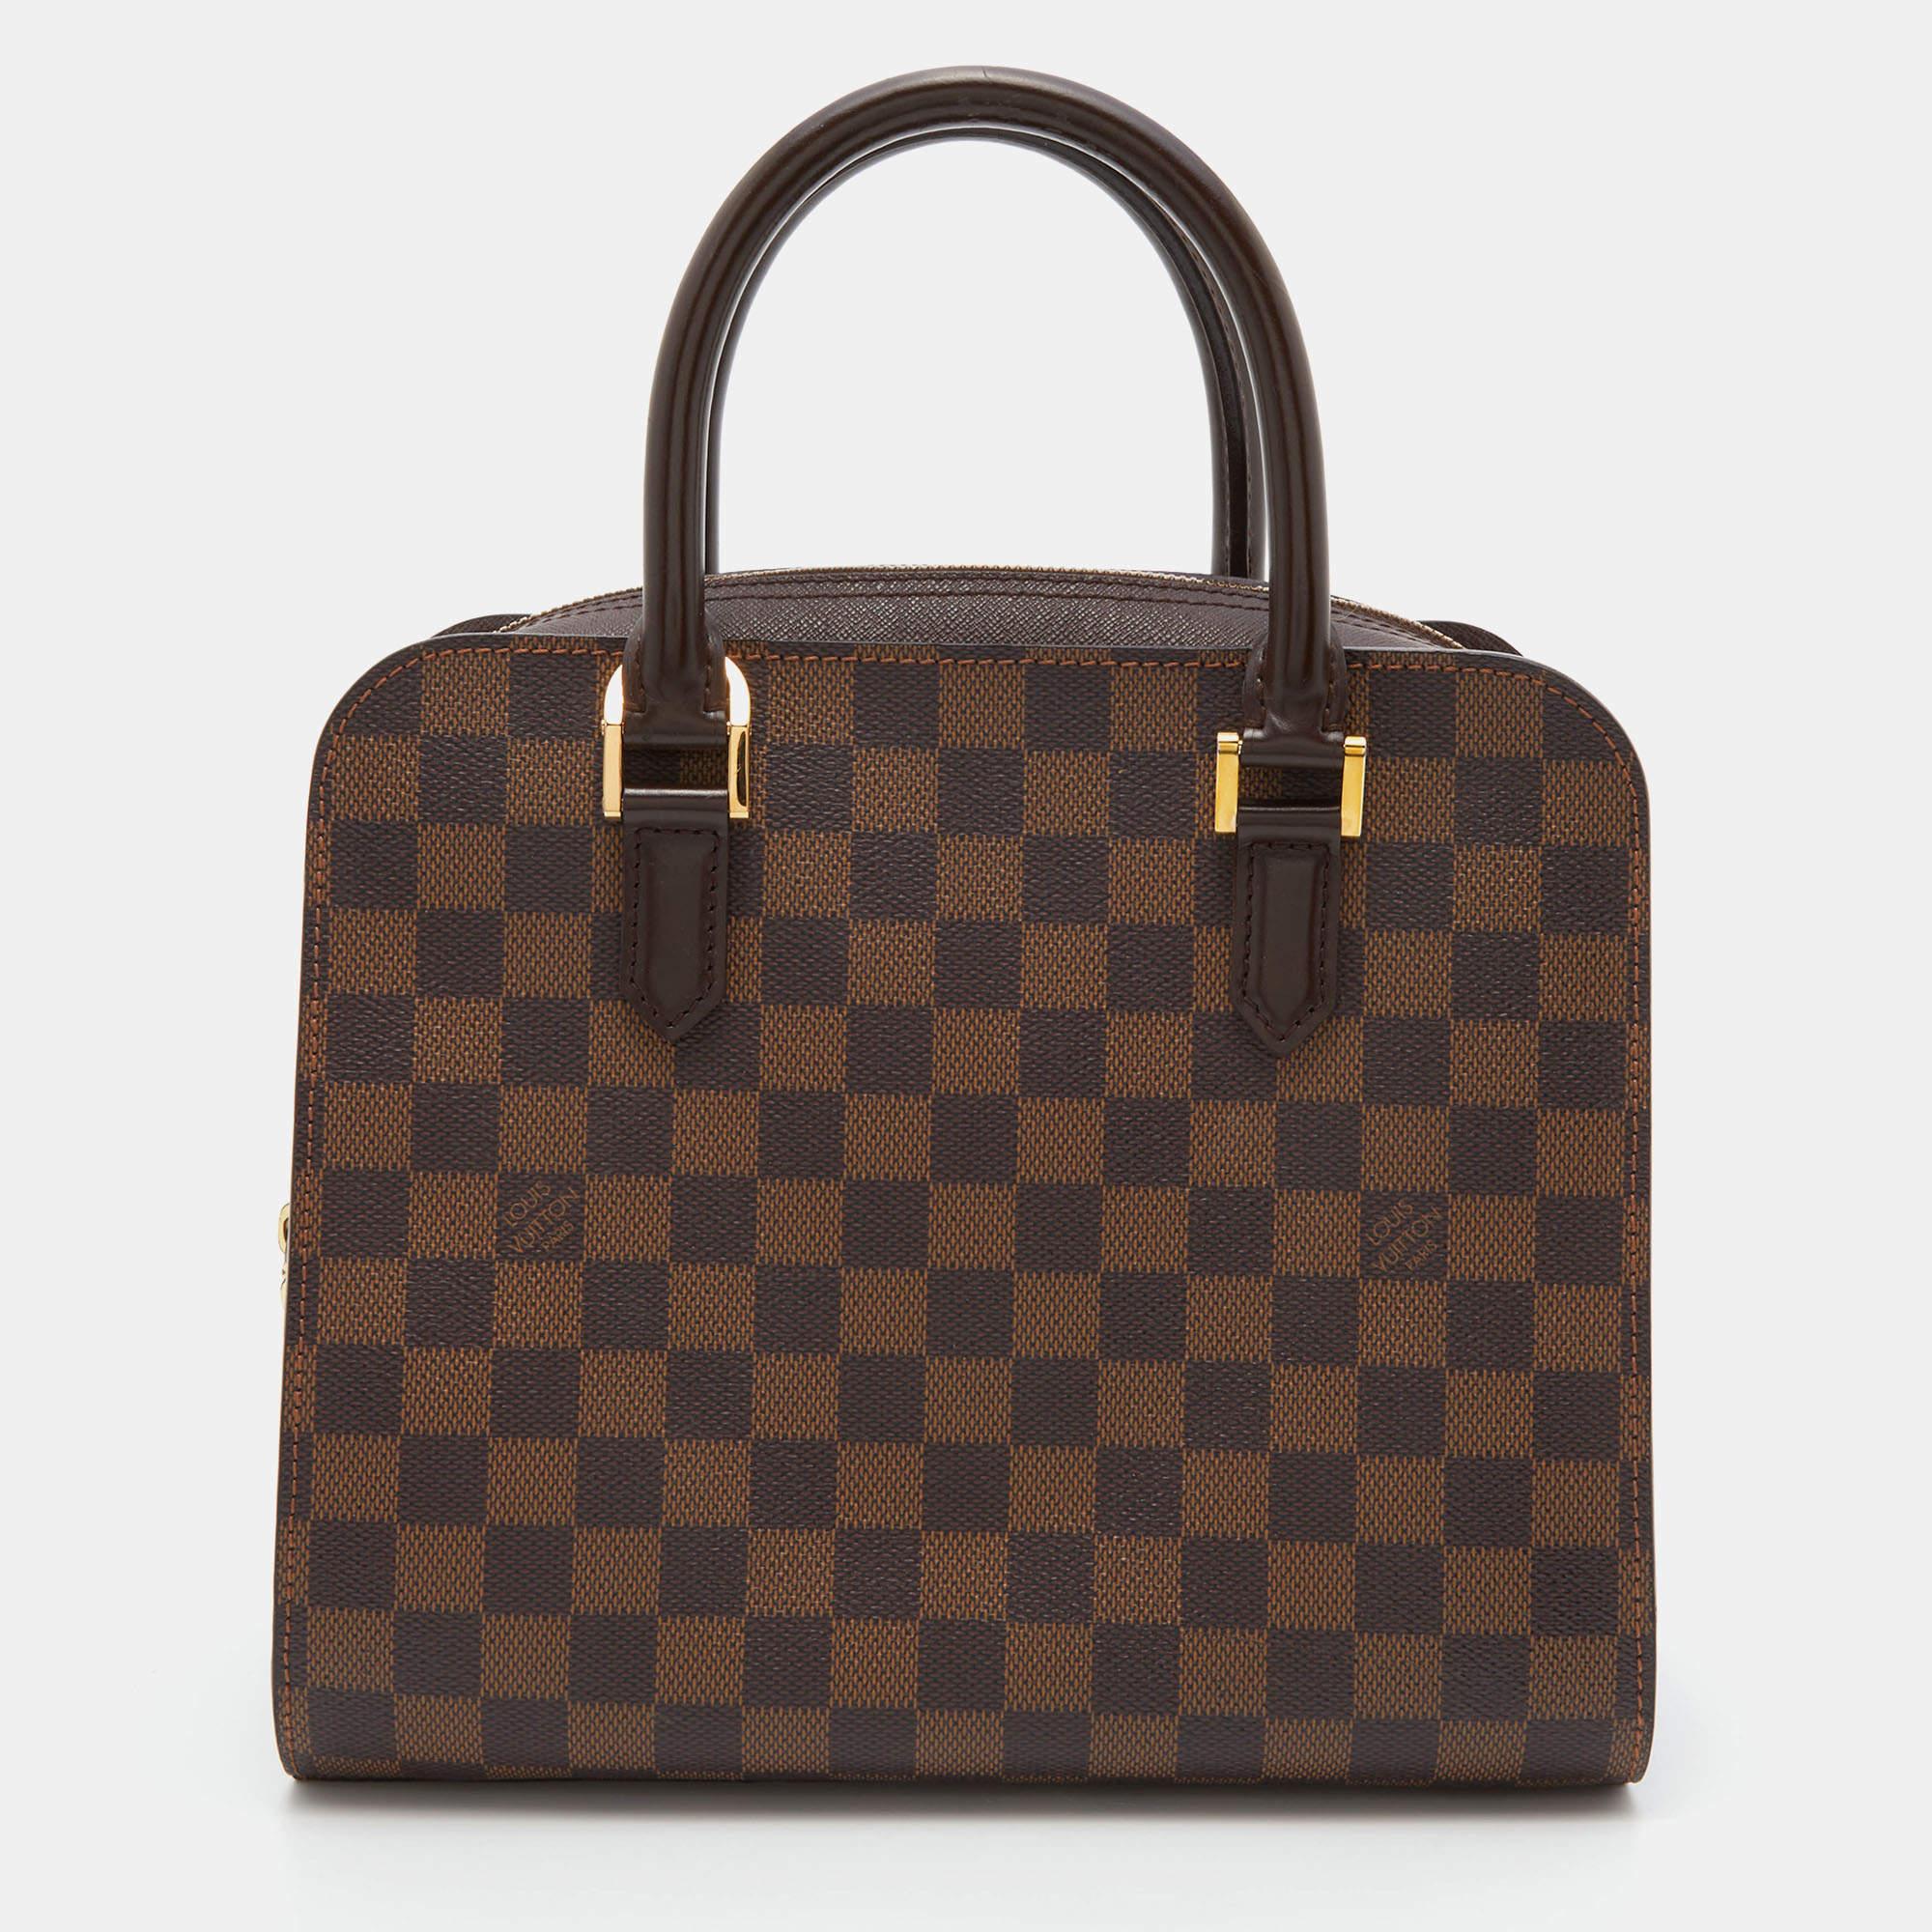 Louis Vuitton Damier Ebene Canvas and Leather Triana Bag 7